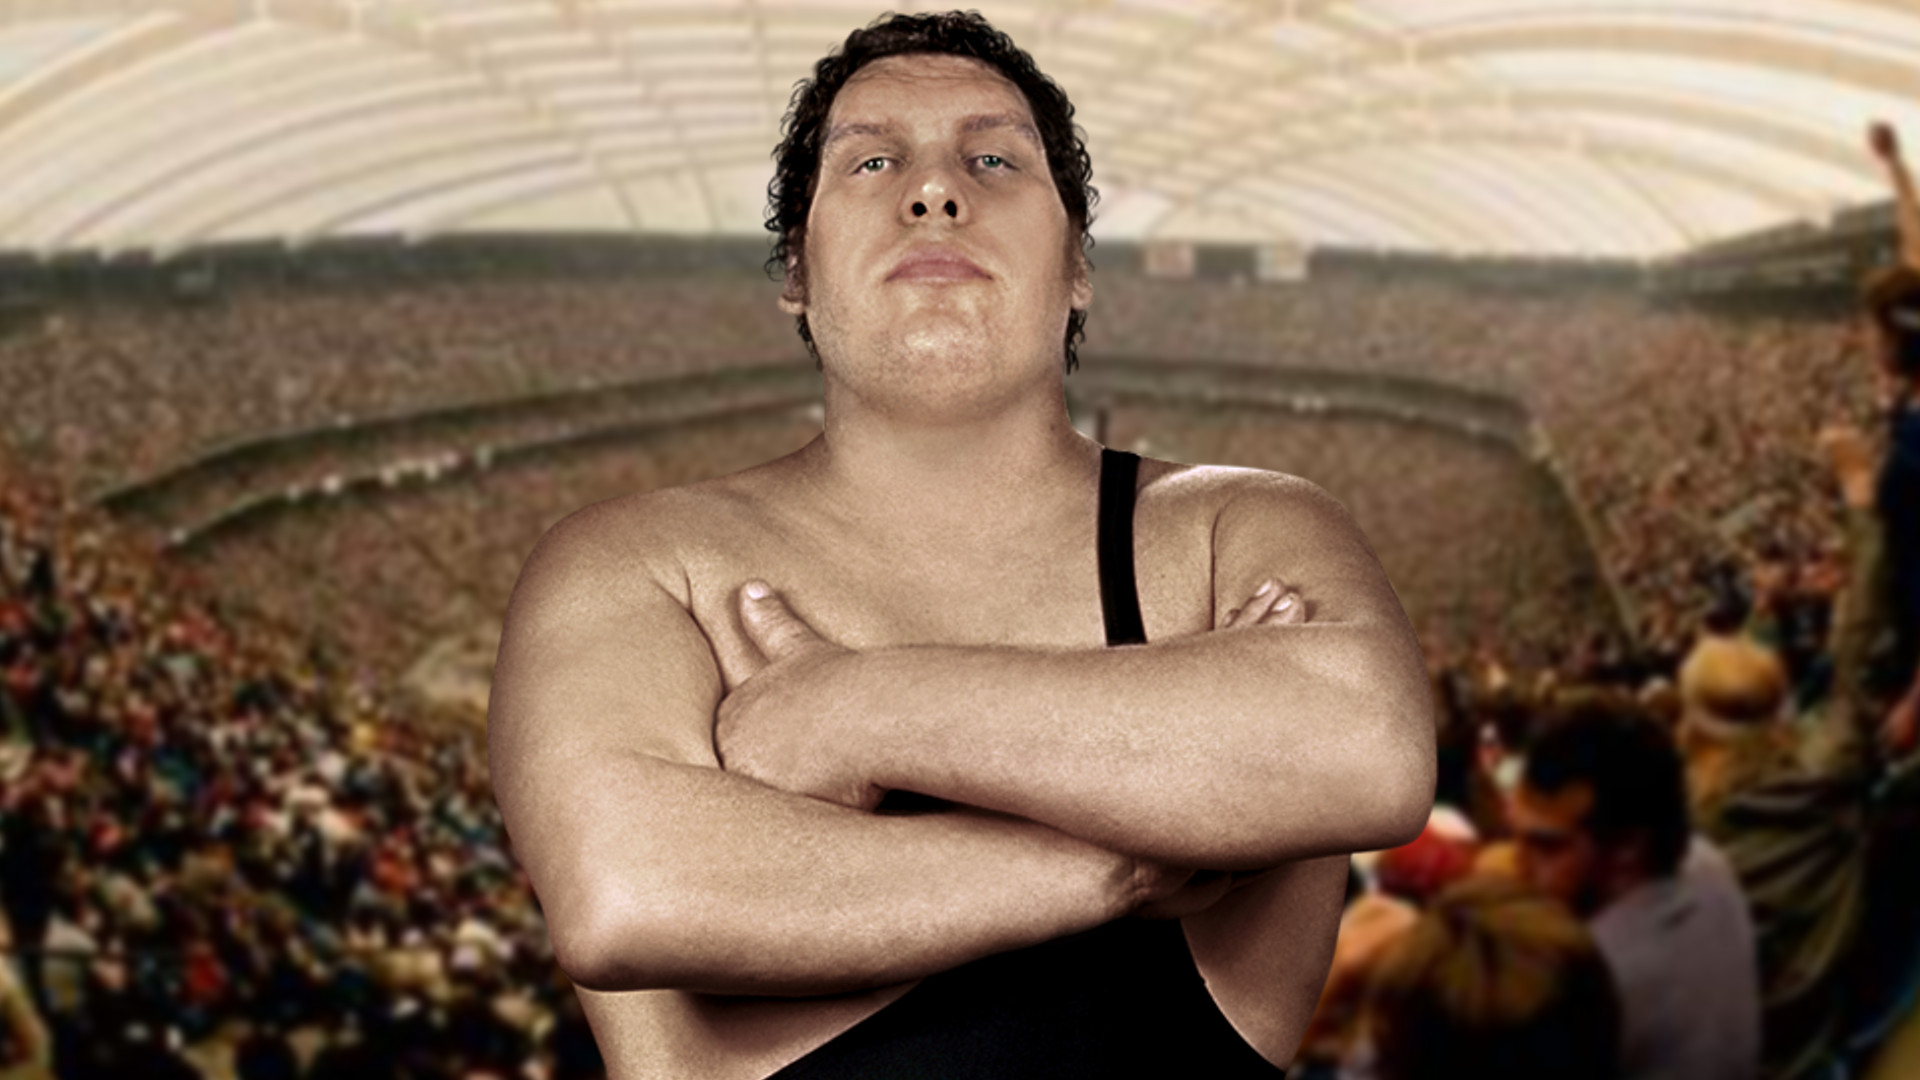 WrestleMania III Backgrounds, Compatible - PC, Mobile, Gadgets| 1920x1080 px